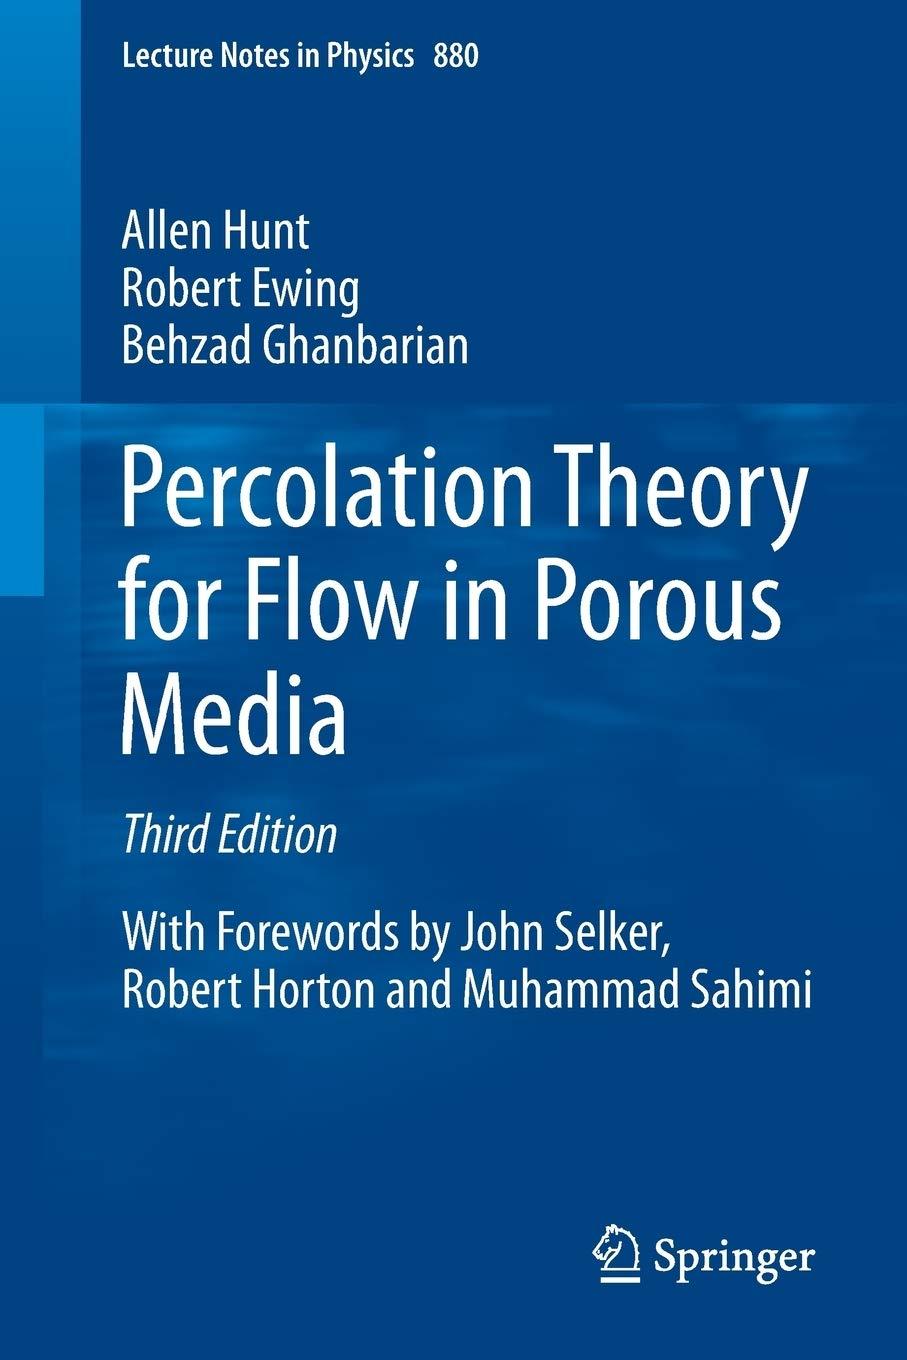 percolation theory for flow in porous media 3rd edition allen hunt, robert ewing, behzad ghanbarian